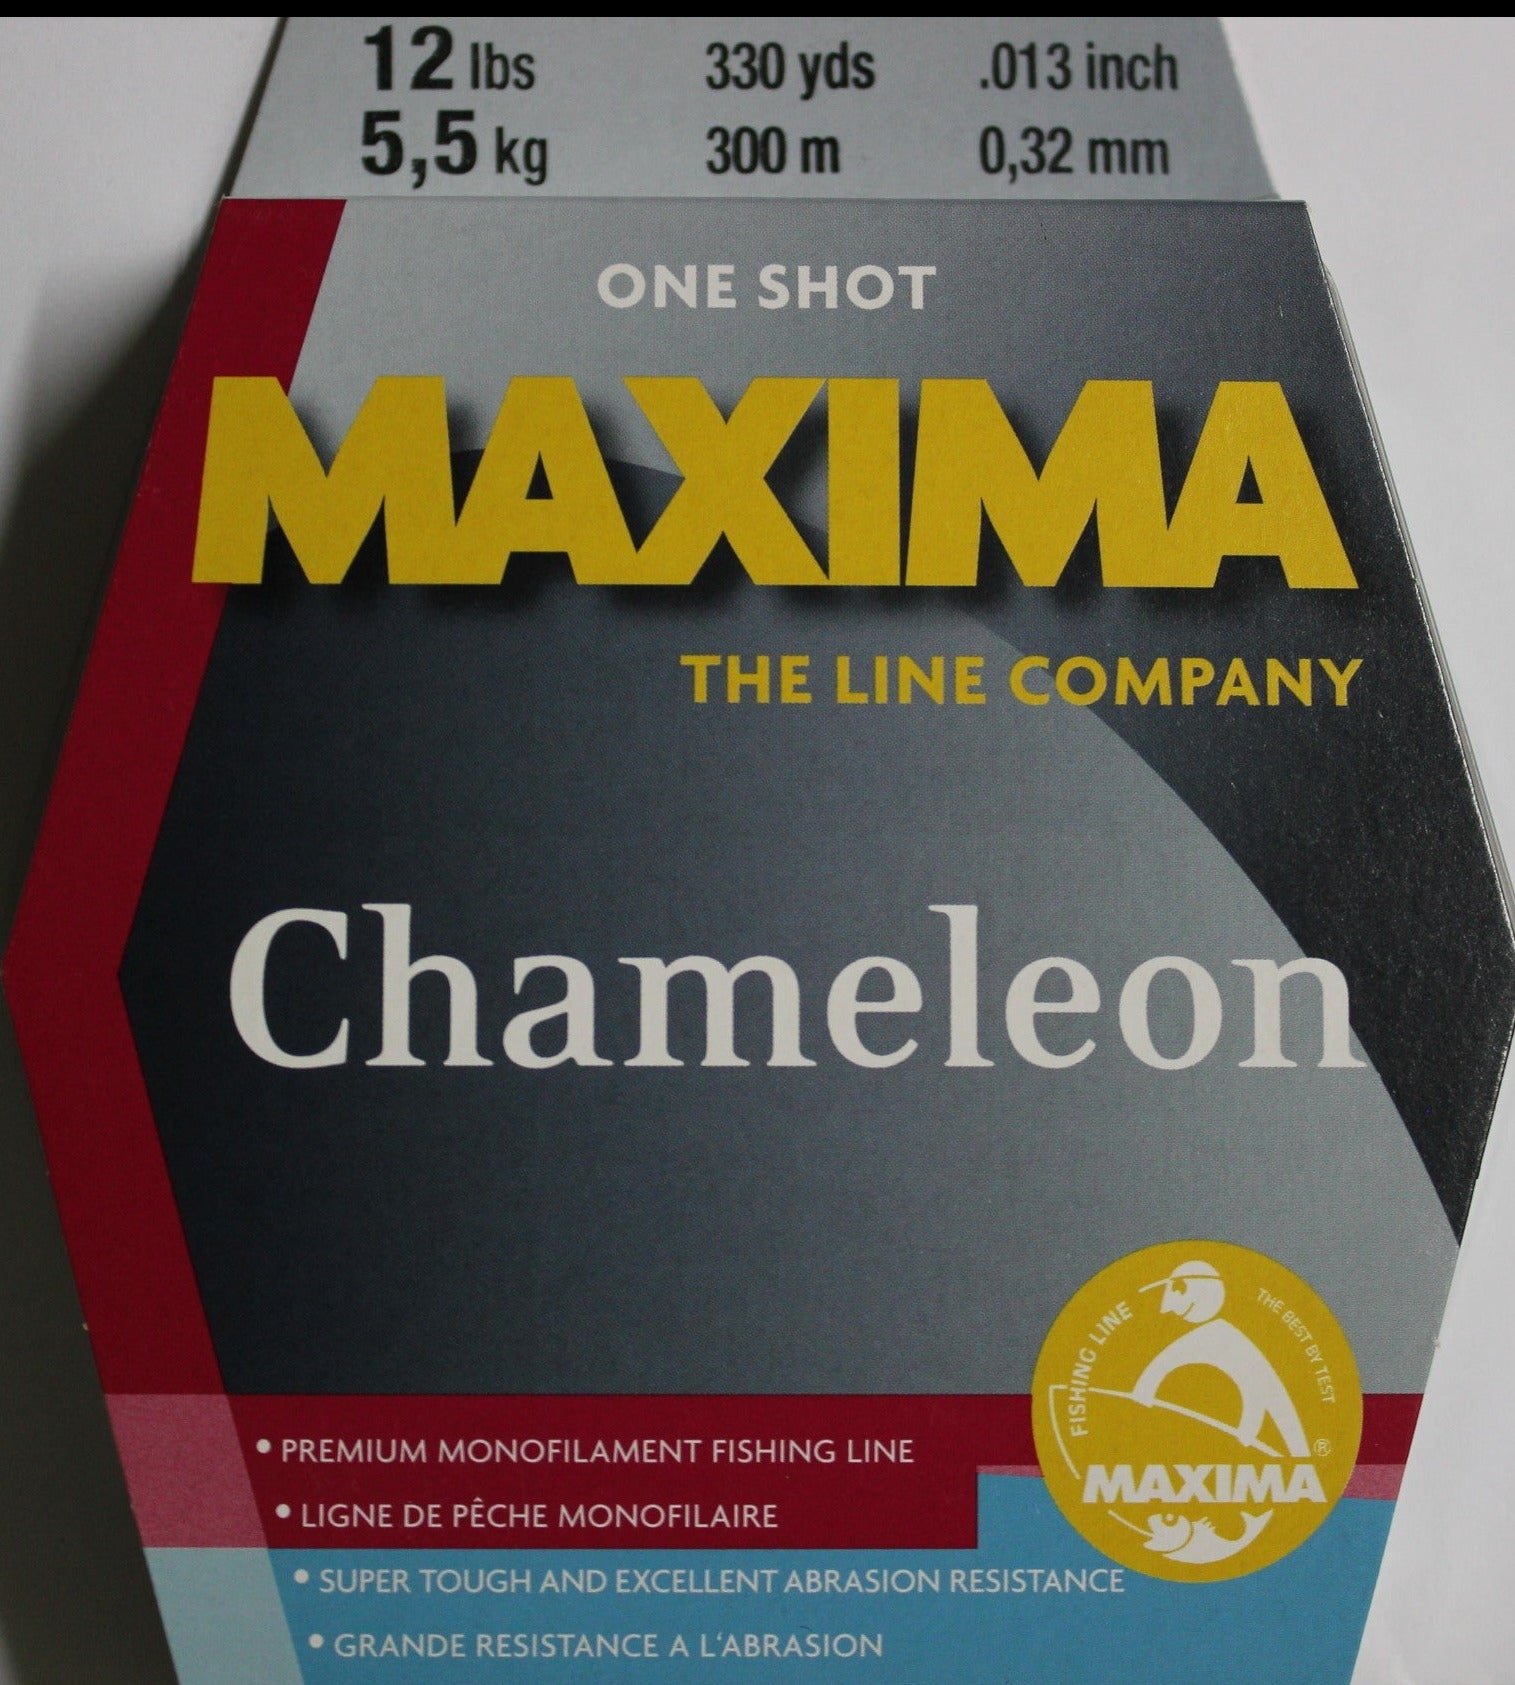 Maxima Chameleon Line - as Outdoor